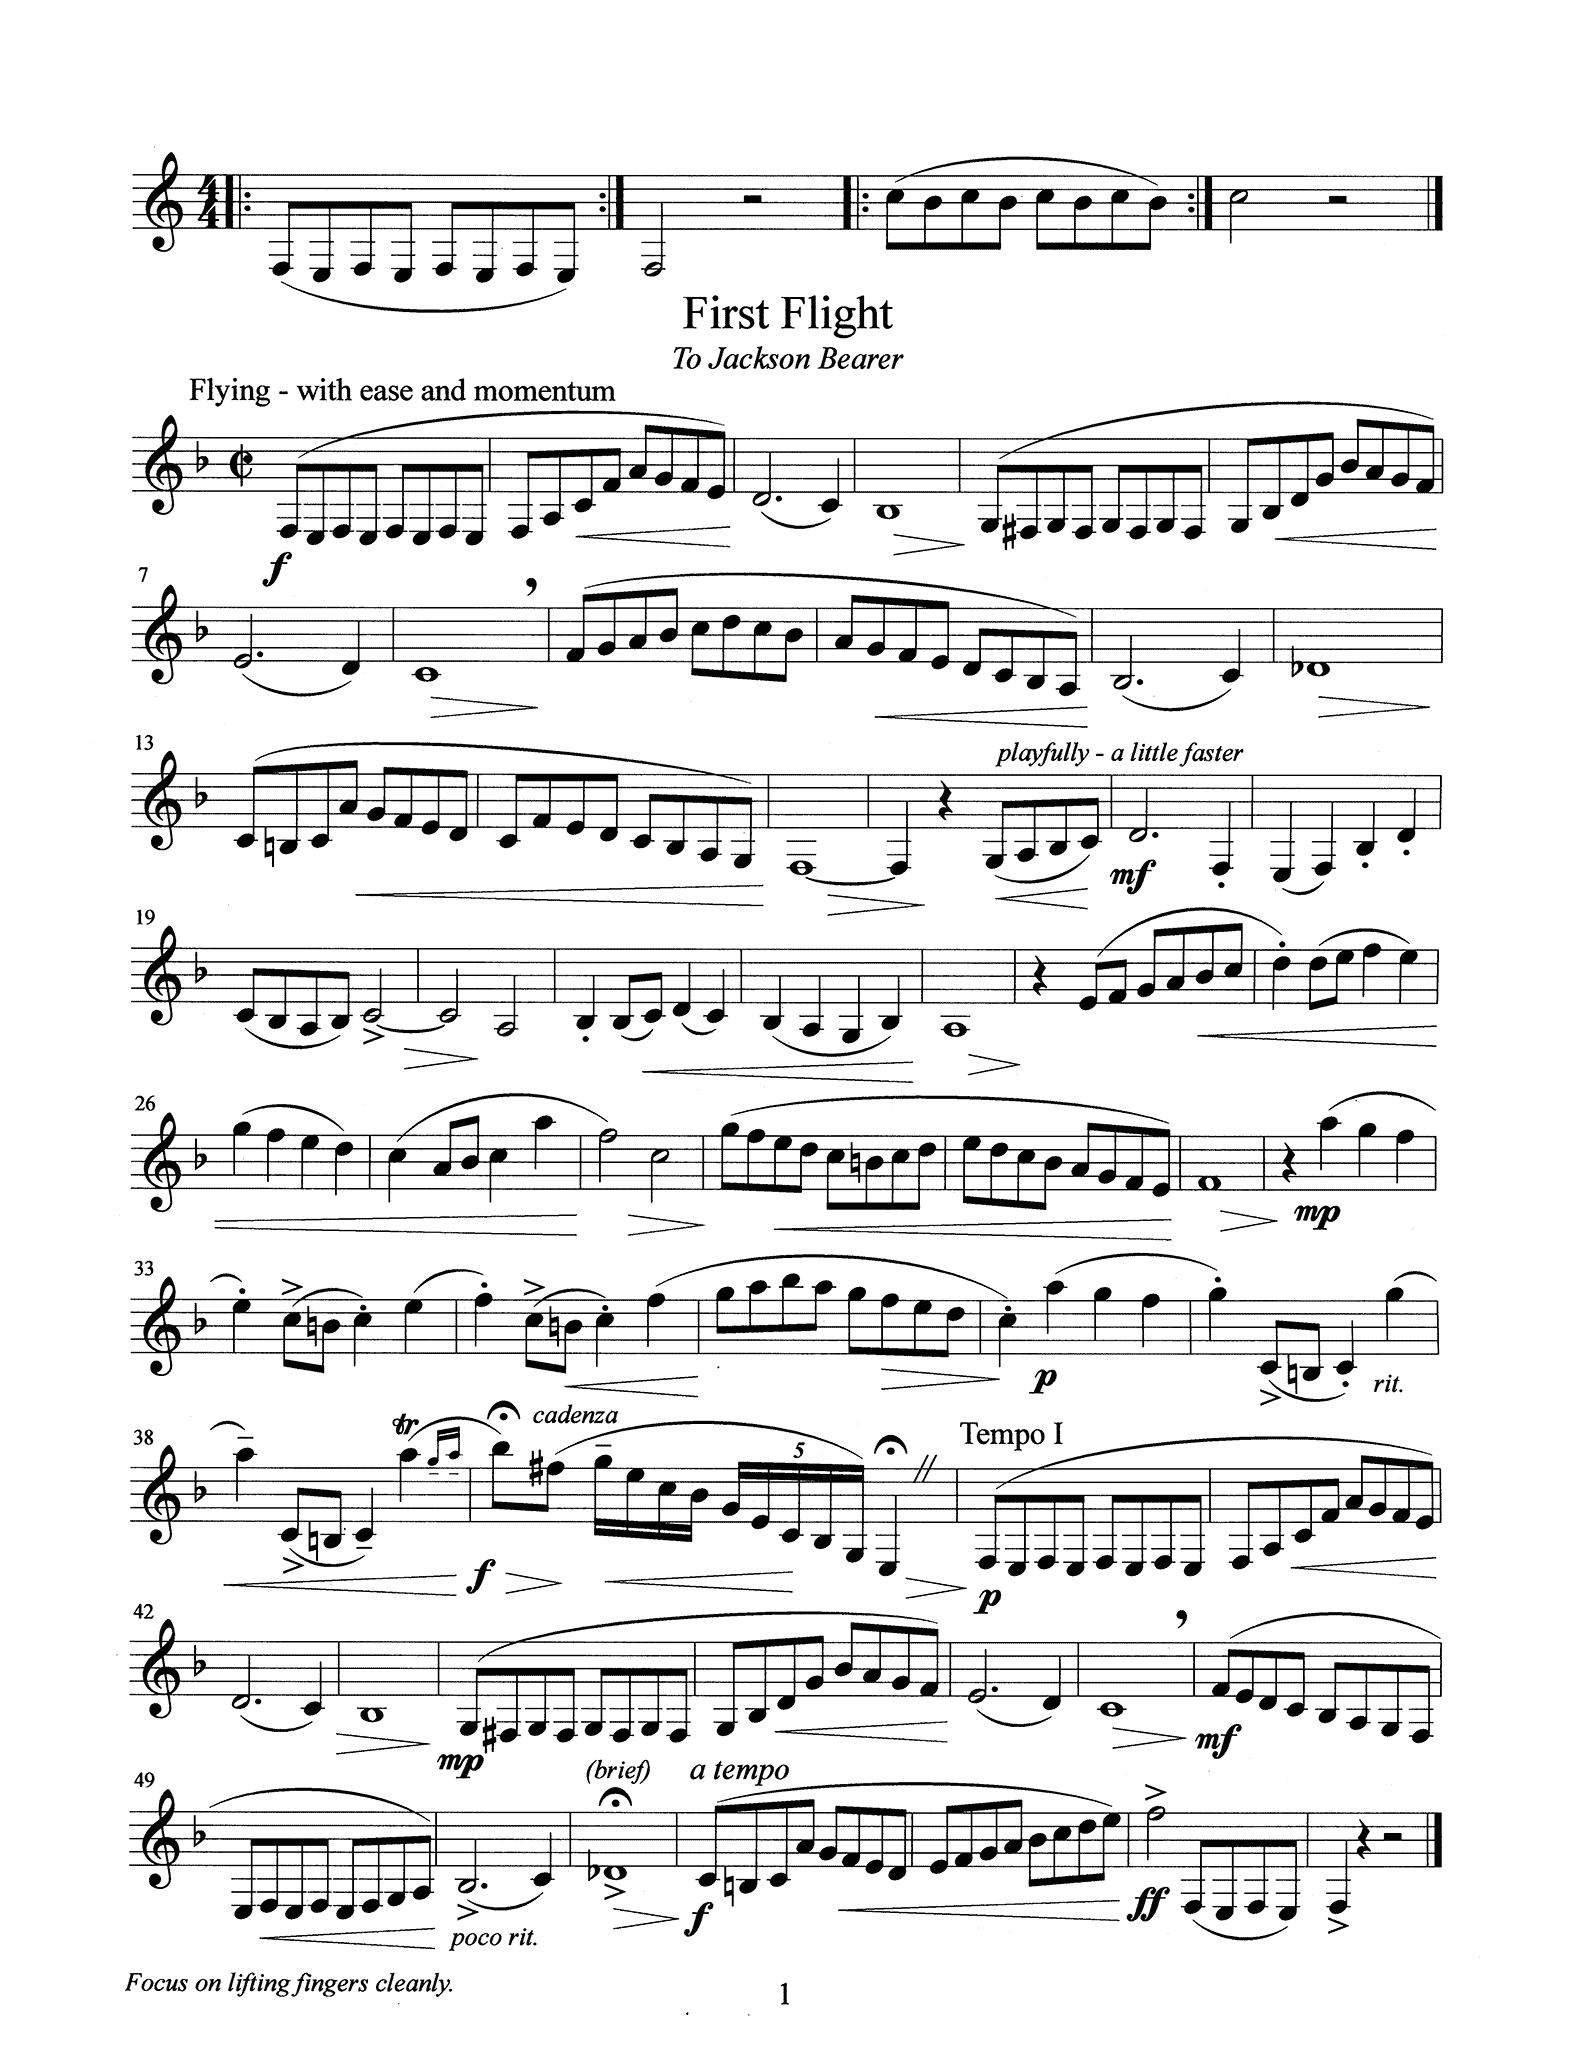 Denny-Chambers Finger Fitness Clarinet Études Page 1